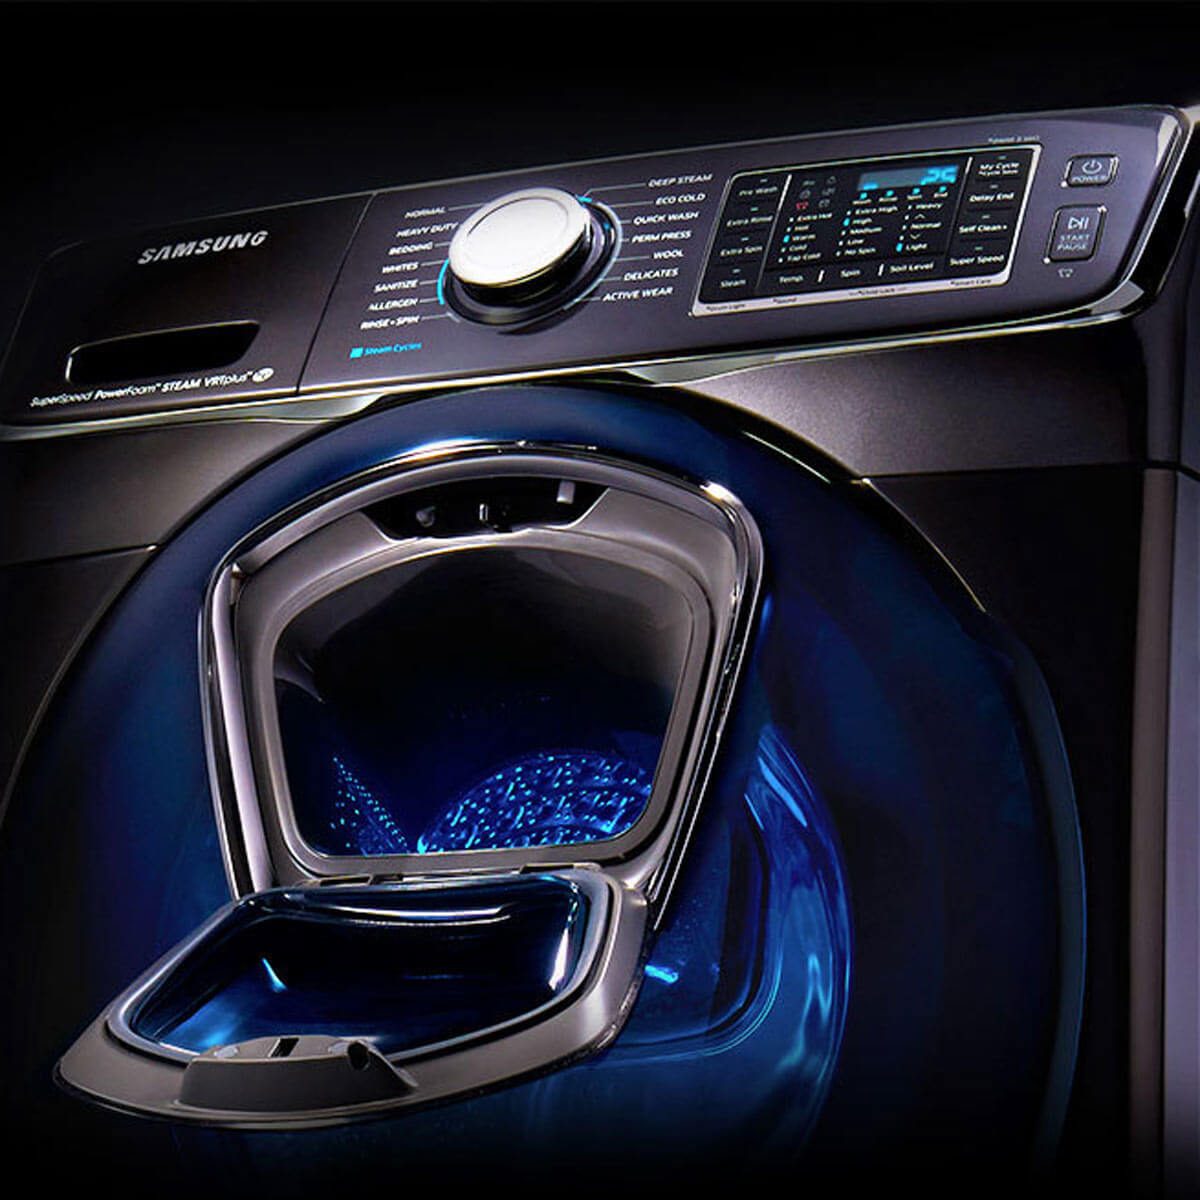 <div class="tip"> <div class="tip-content">Many more <a class="SWhtmlLink" href="https://www.familyhandyman.com/project/how-to-repair-a-leaking-washing-machine/" rel="noopener noreferrer">washing machines</a> today lock the loading door and take quite a while to unlock so you can't easily throw stuff in that was forgotten once the cycle has started. And are there people in your house who always forget that last sock or decide once the machine is running that they want one more item washed? If so, make sure you get a <a href="https://www.familyhandyman.com/article/wheres-my-washing-machine-filter-and-do-i-really-need-to-clean-it/">washing machine</a> that will accommodate them and is easy to open the door after you've started the cycle. Also, there are new machines that have a smaller door built into the main door that allows you to toss in forgotten articles while the cycle is running.</div> </div>